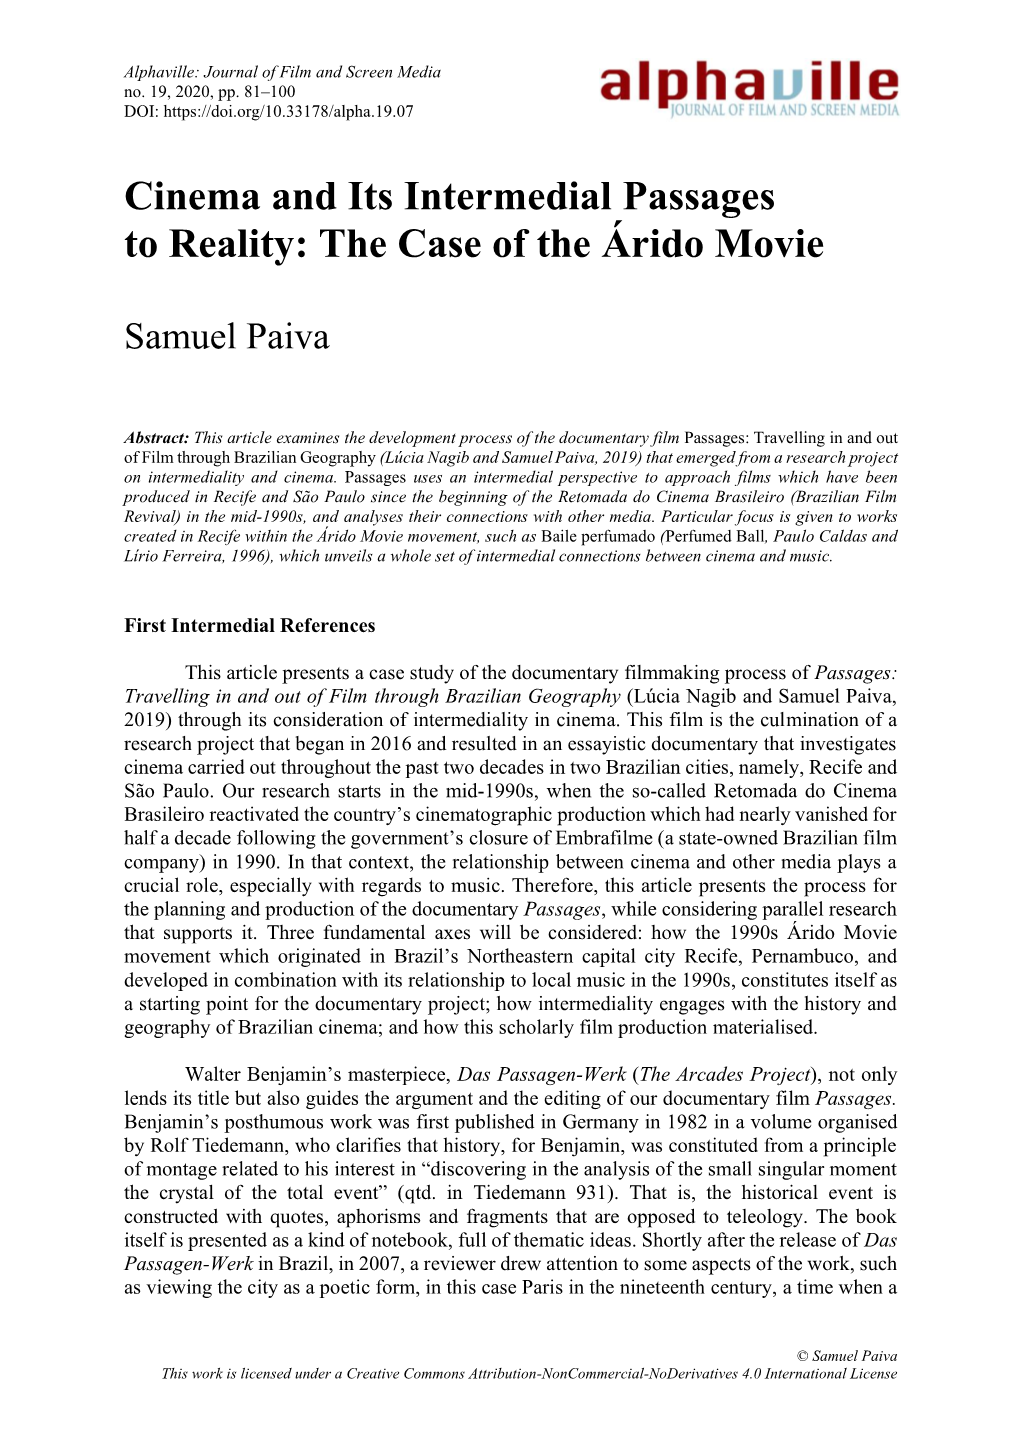 Cinema and Its Intermedial Passages to Reality: the Case of the Árido Movie